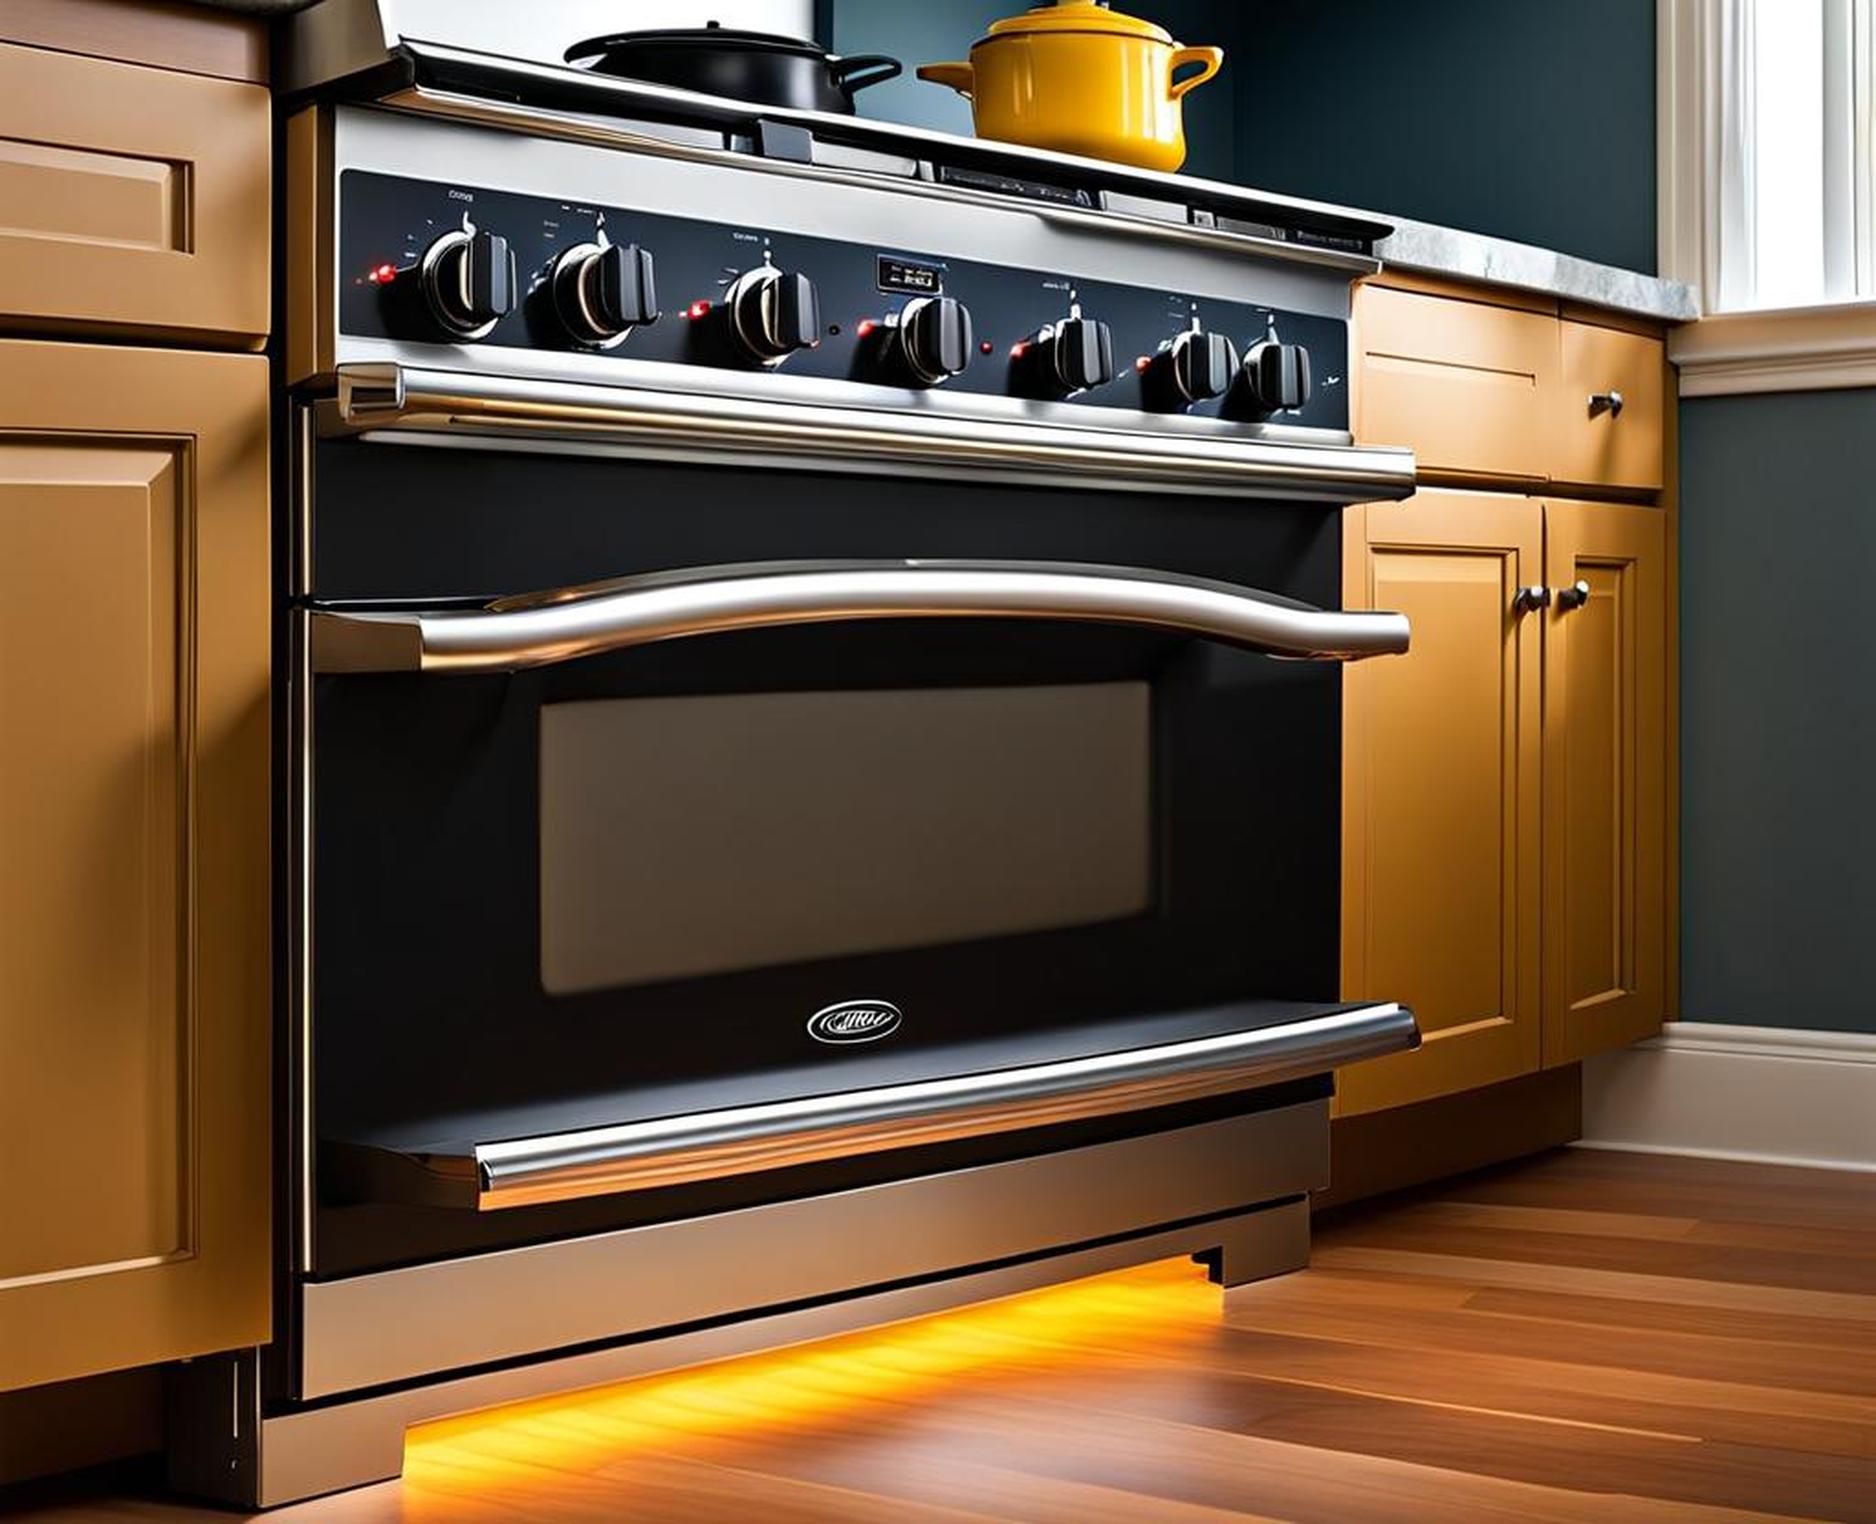 The Complete Guide to Electric Stove Wiring for Any Homeowner